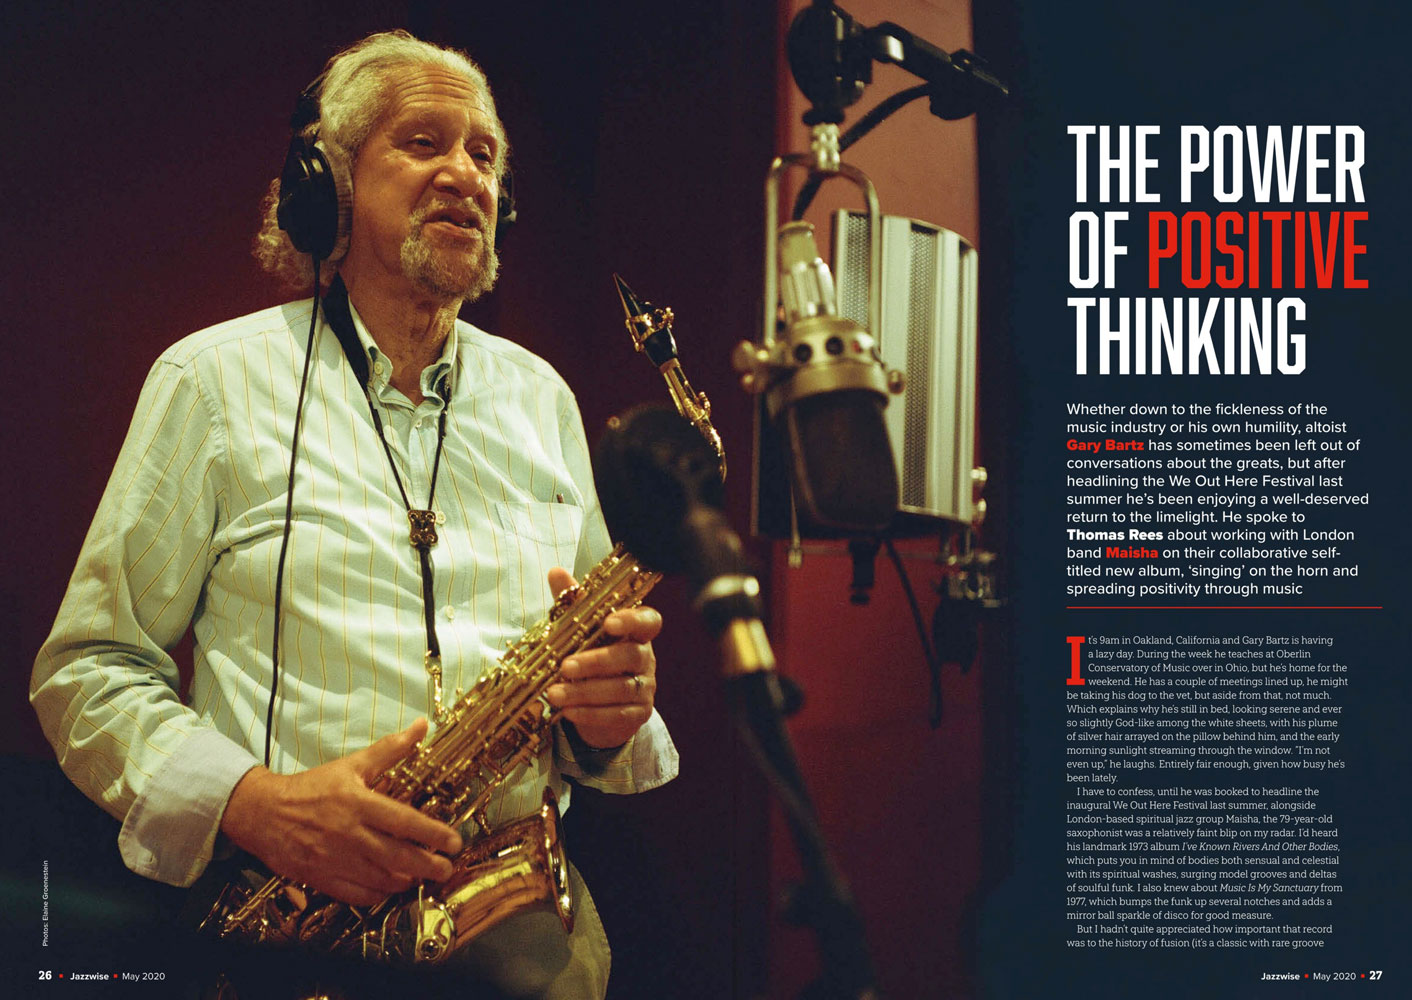 Introducing the May 2020 issue of Jazzwise